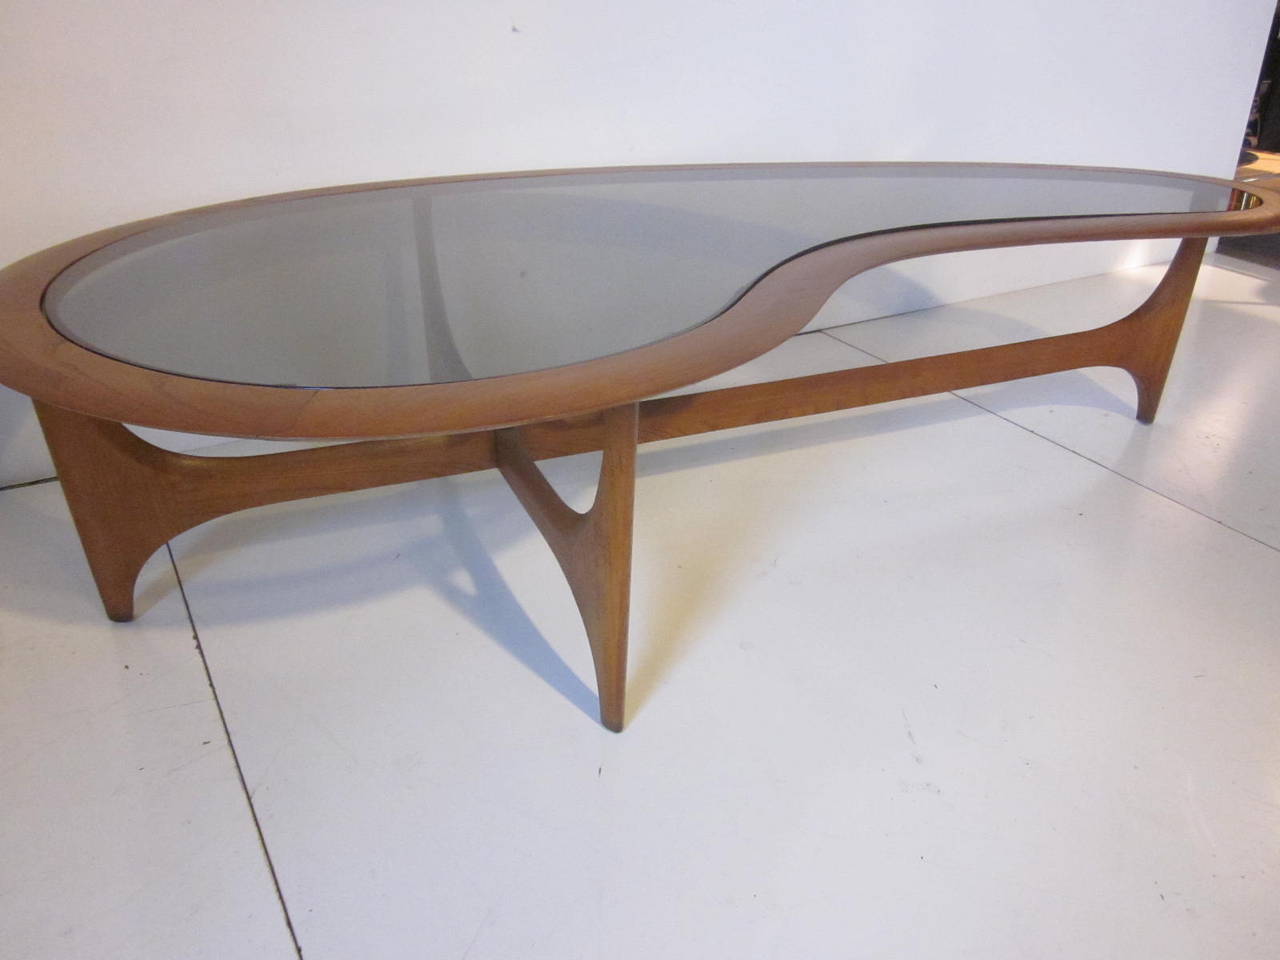 A sculptural wood coffee table with a kidney shape slightly tinted glass top insert. Nice interesting legs in the style of Vladimir Kagan manufactured by the Lane Furniture Company.